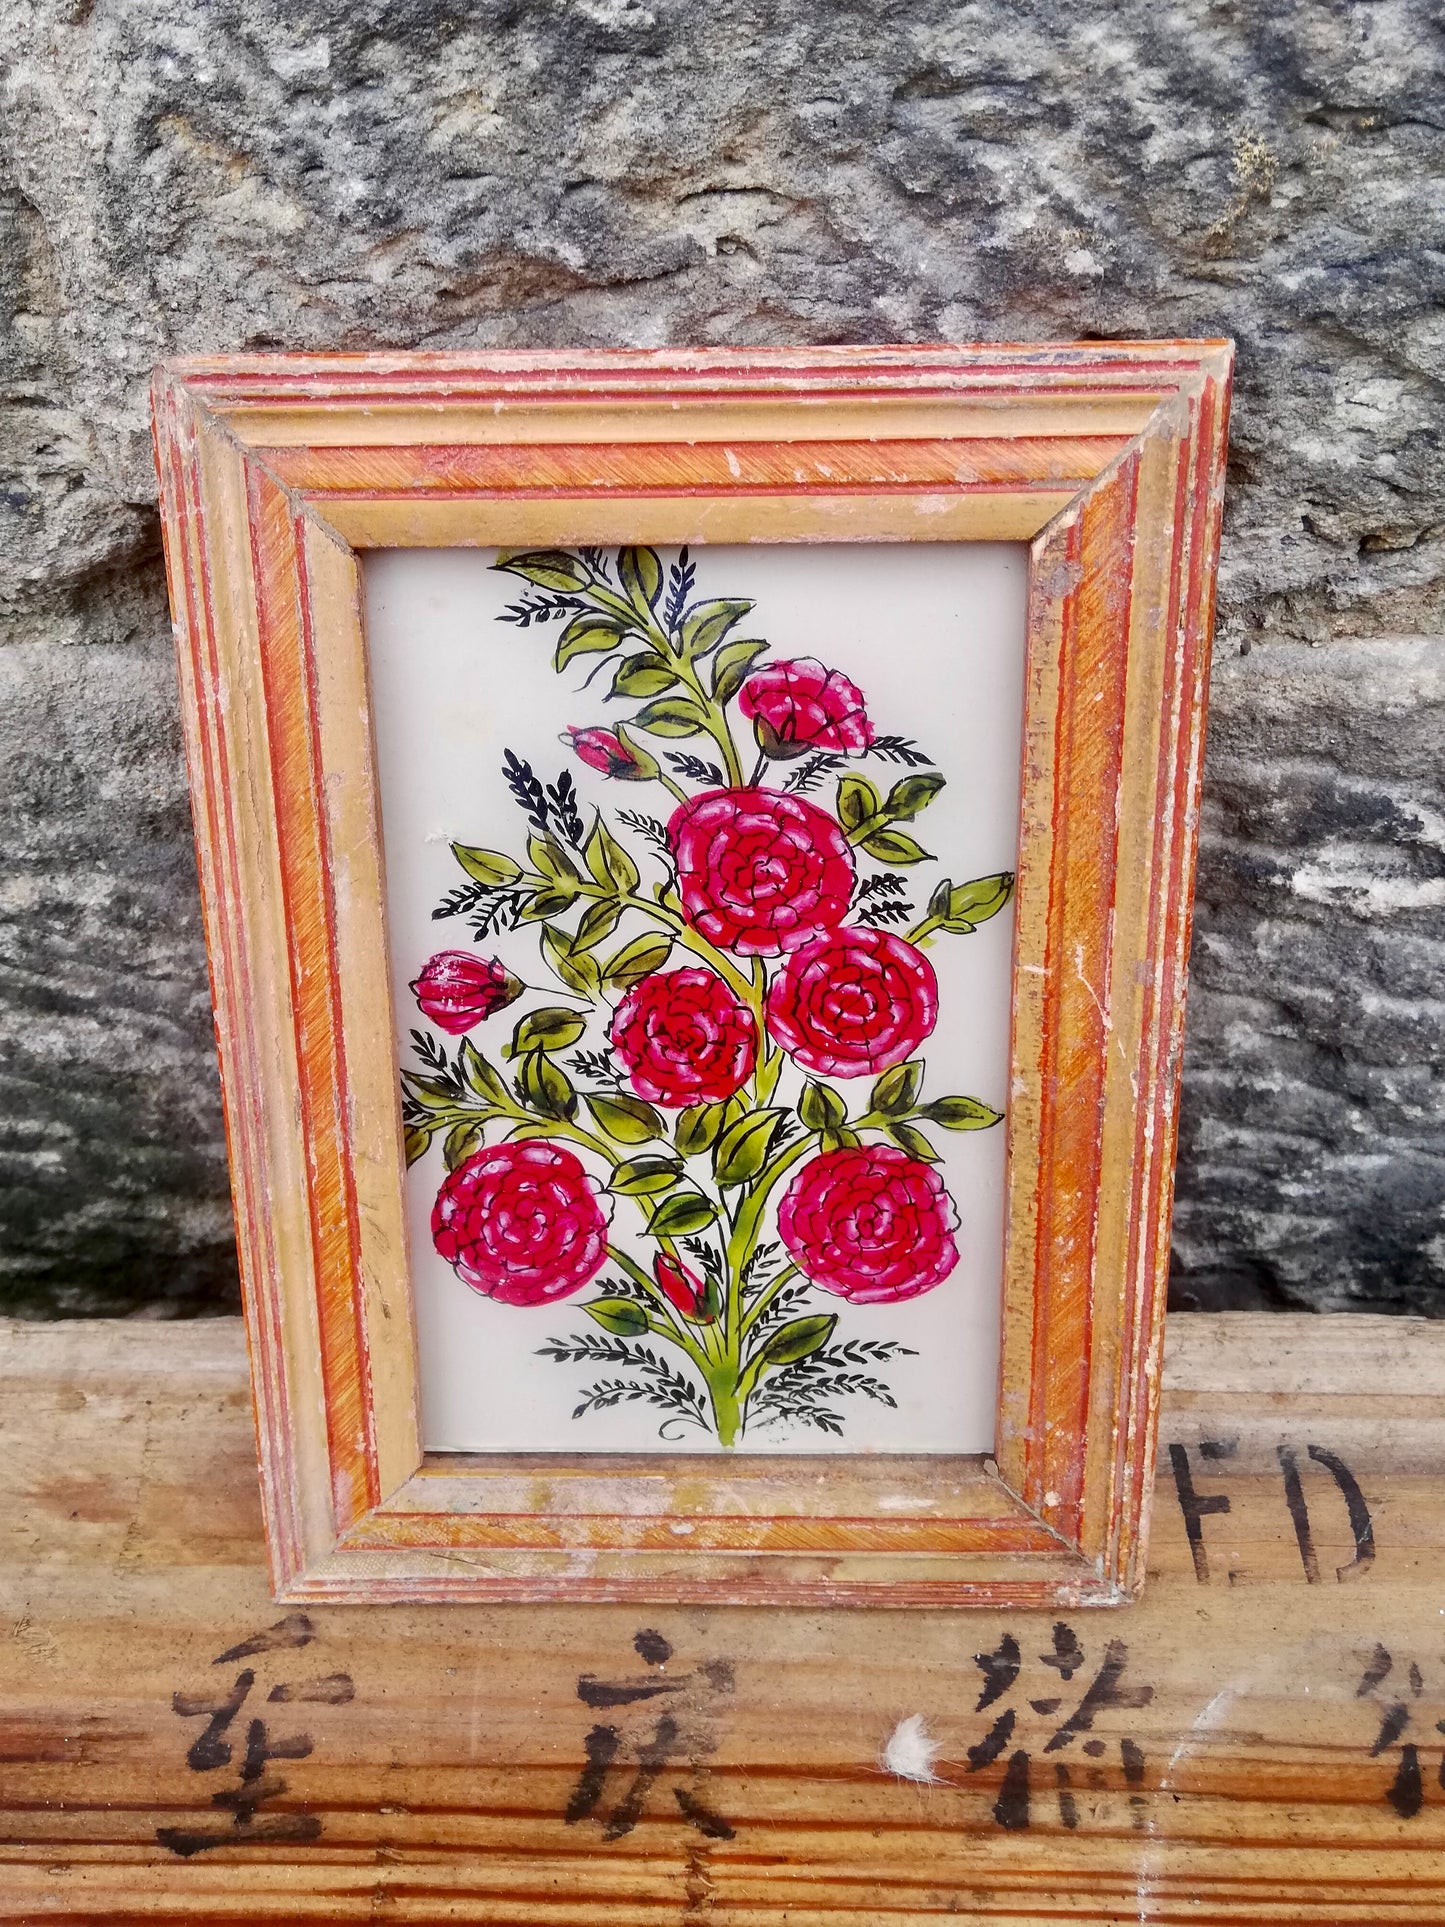 Vintage glass painting of pink flowers in a beautiful original frame